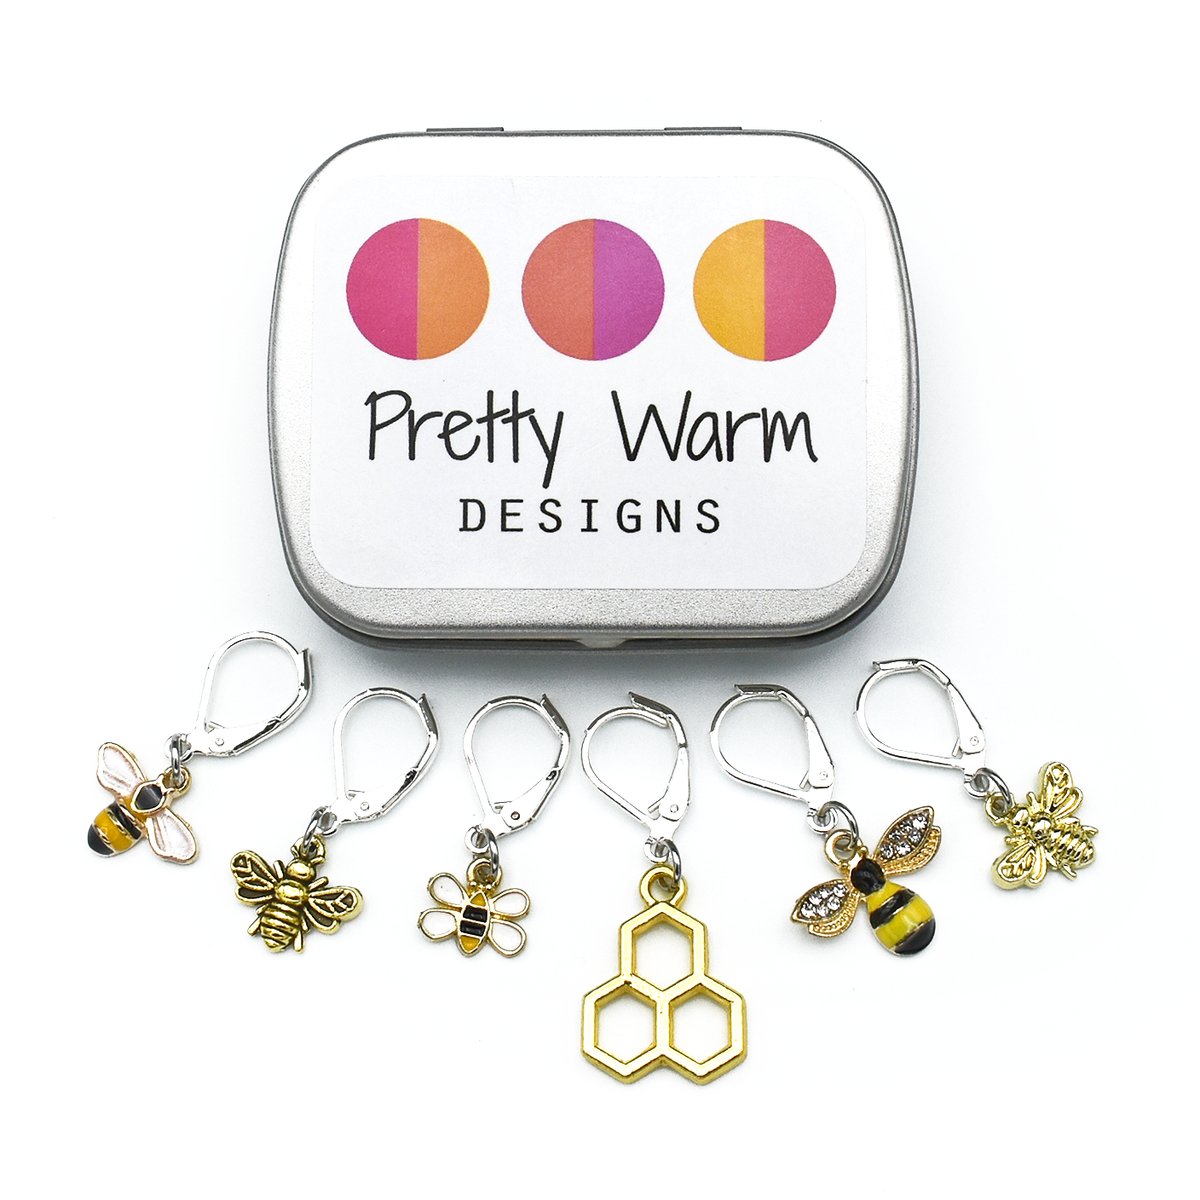 What Are Stitch Markers And How Do I Use Them In Crochet? - Bee